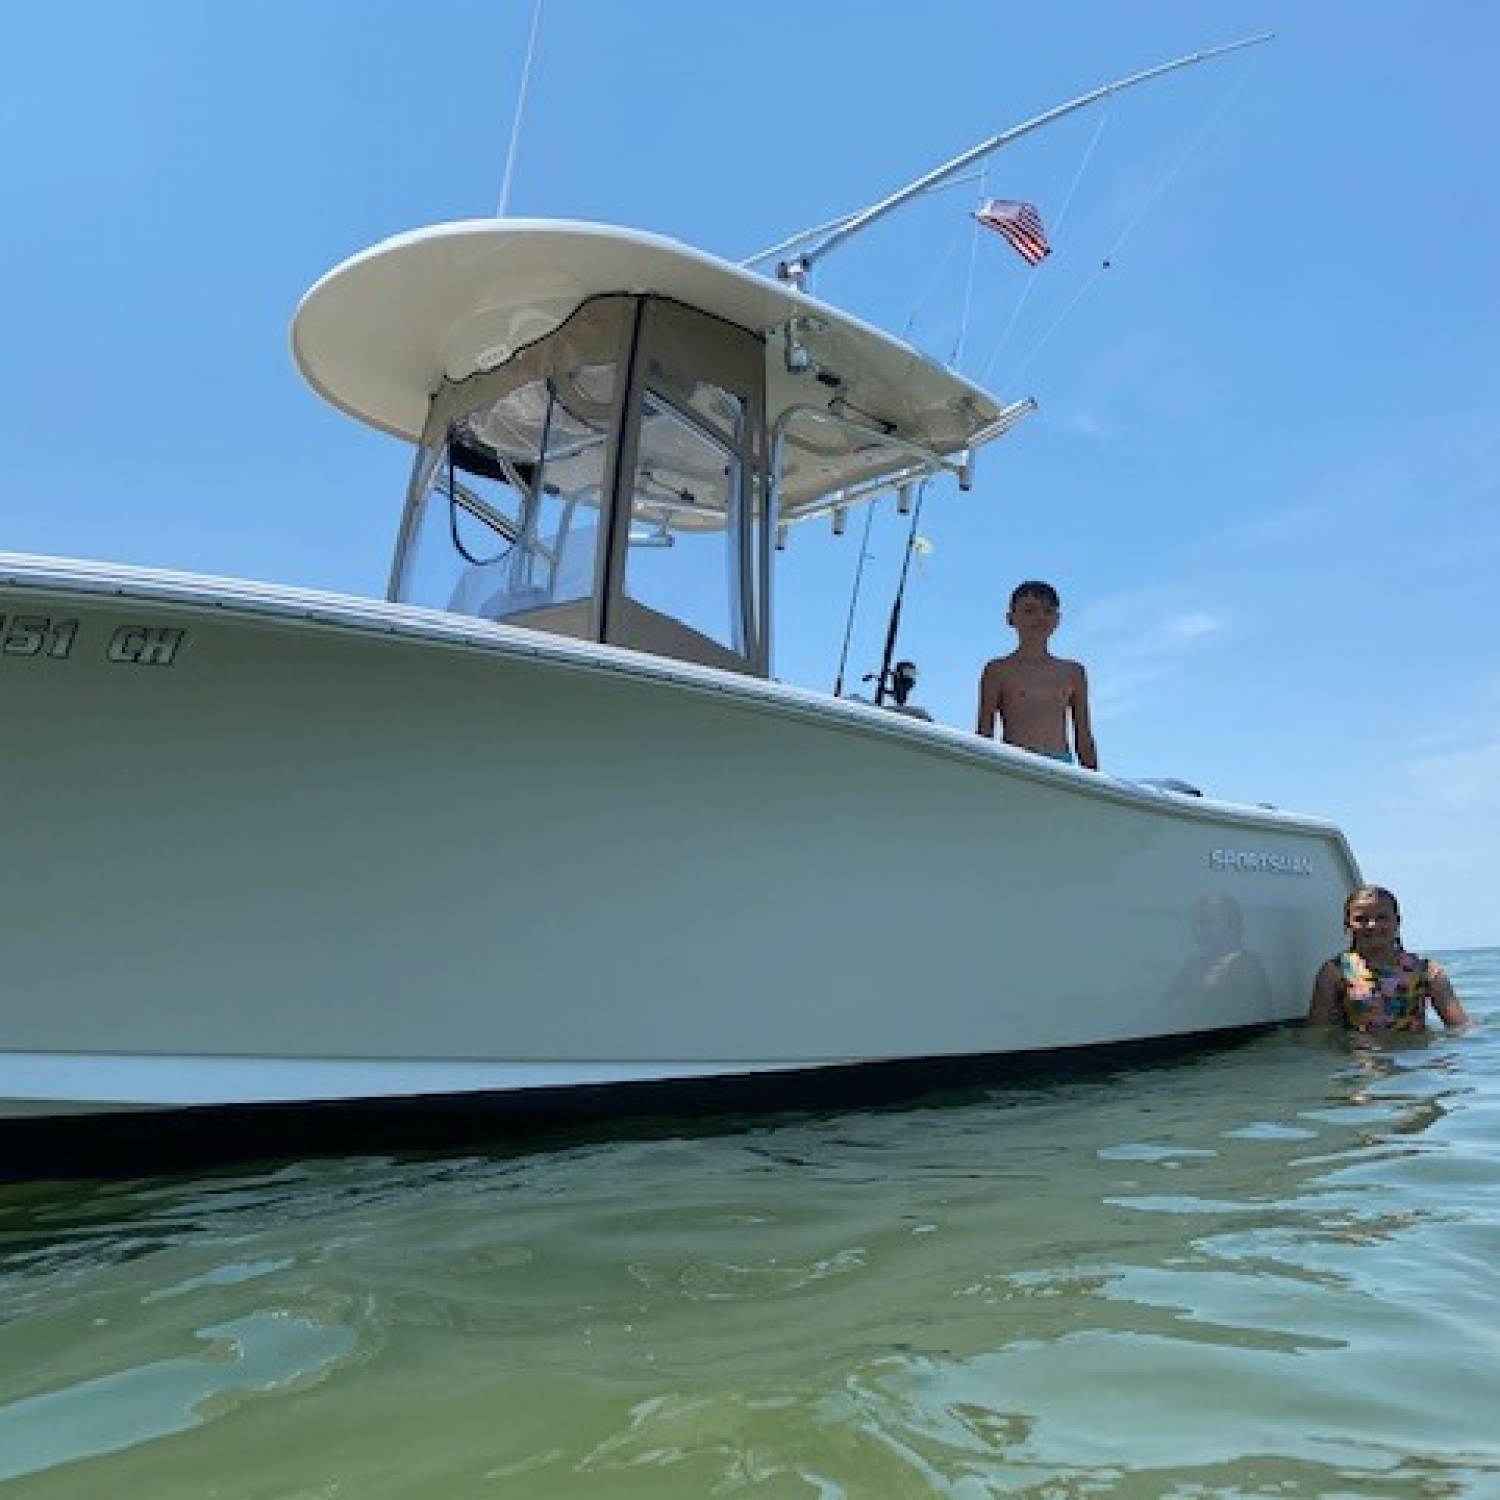 Title: Dream Boat - On board their Sportsman Open 232 Center Console - Location: Virginia Beach. Participating in the Photo Contest #SportsmanNovember2021